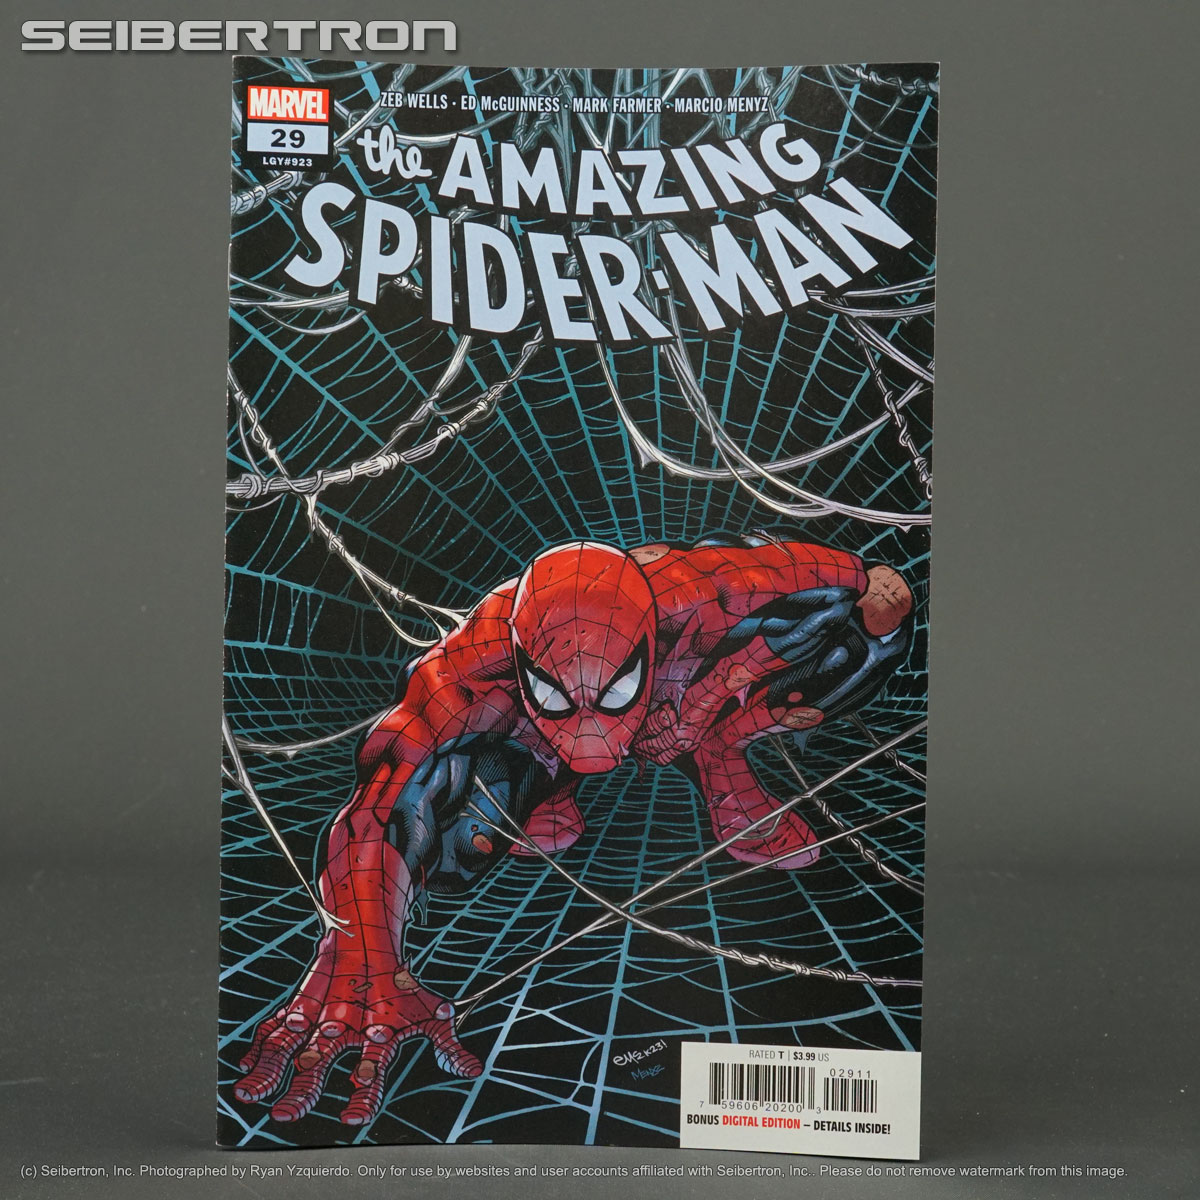 AMAZING SPIDER-MAN #29 Marvel Comics 2023 MAY230659 (W) Wells (A/CA) McGuinness